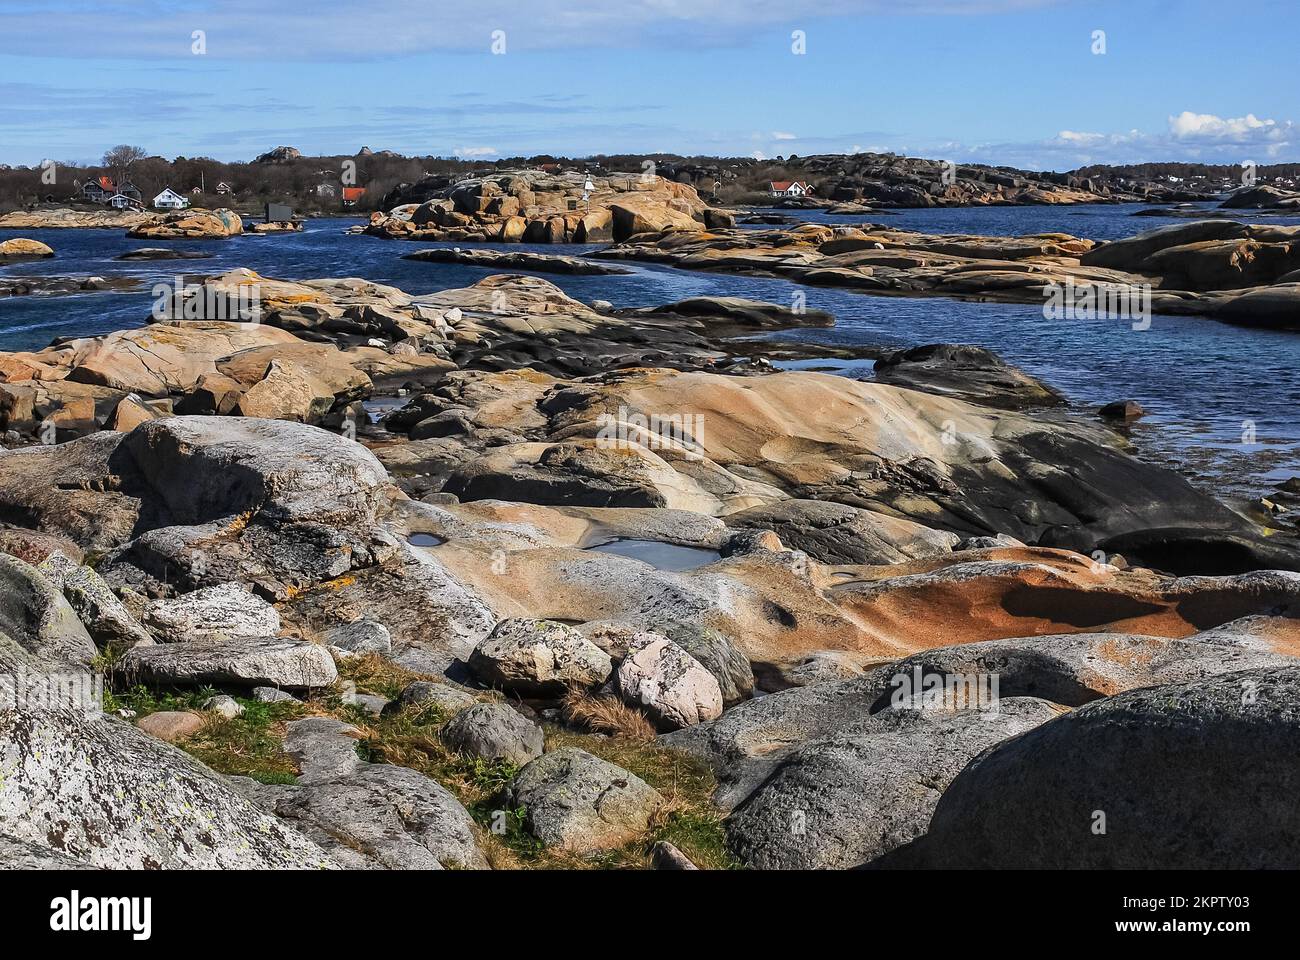 A beautiful view of the rocky coastline of a place called 'The End of the World'. Norwegian landscape.  Verdends Ende, Norway. Stock Photo